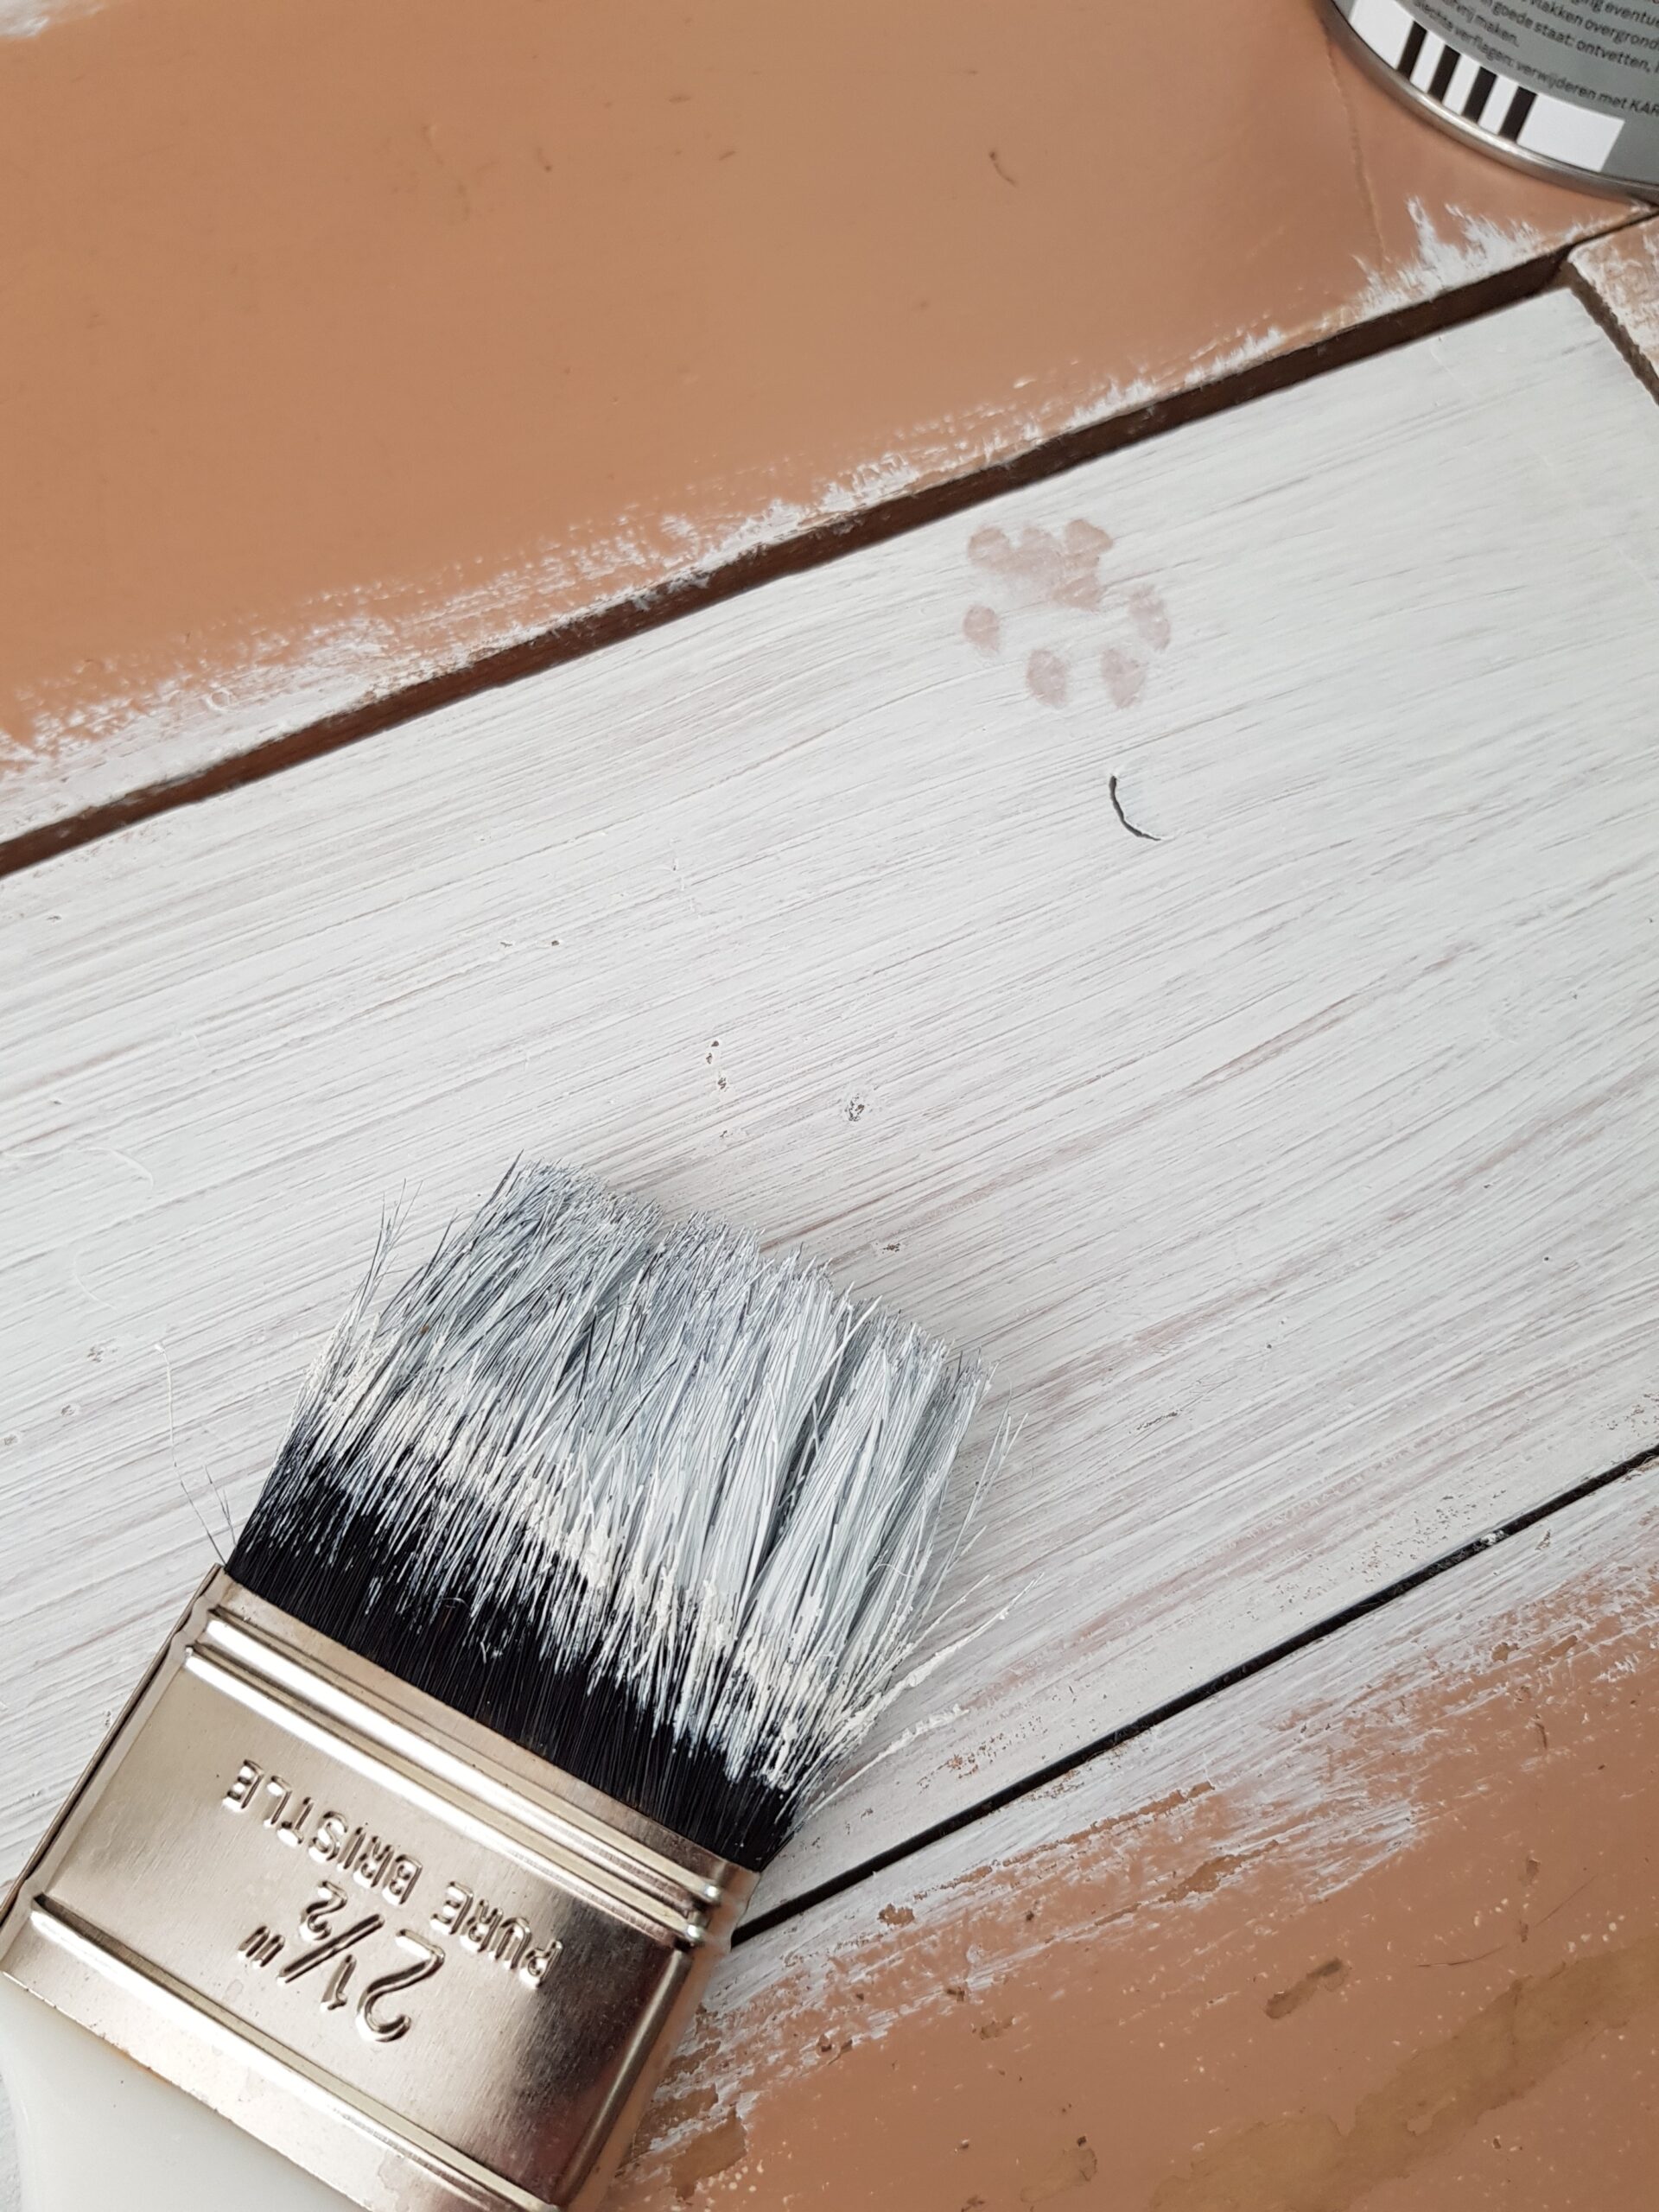 A paintbrush applying white paint onto a wooden surface.